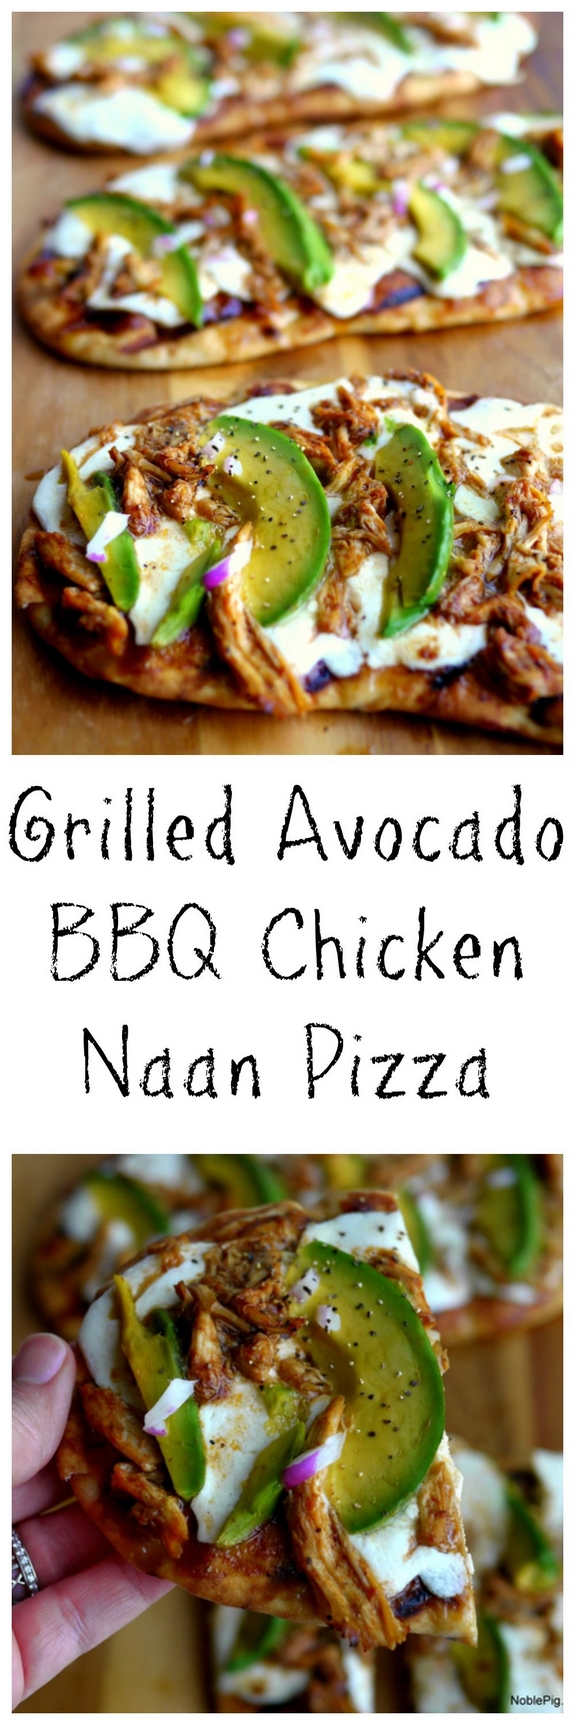 Grilled Avocado Barbecue Chicken Naan Pizza the perfect meal anytime